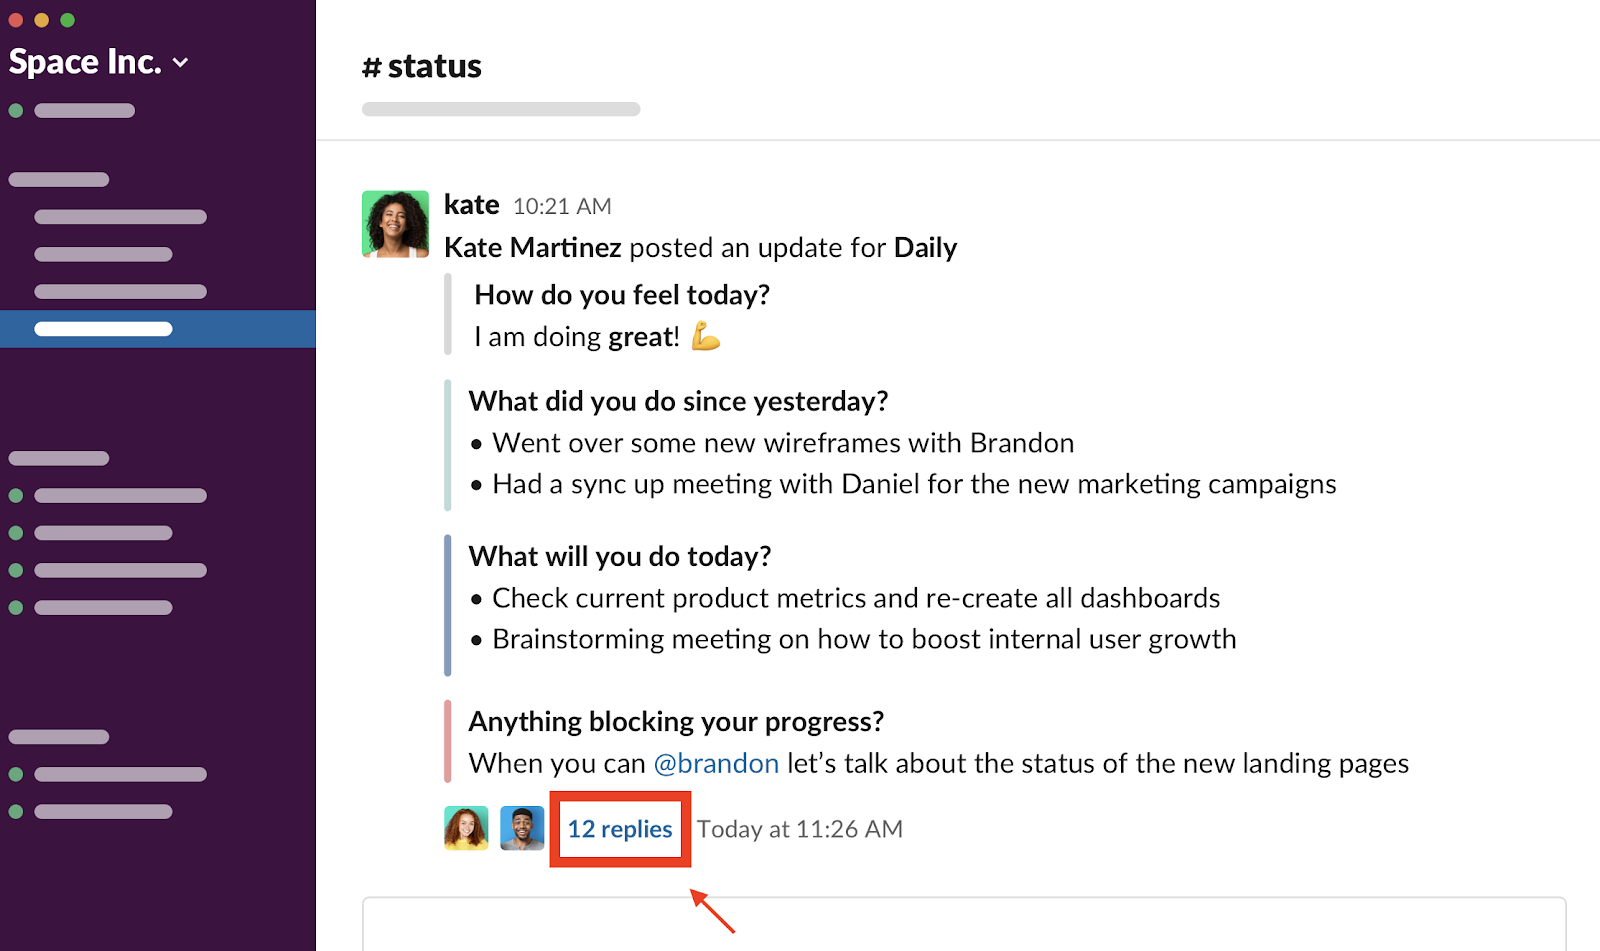 Geekbot pushes daily updates to a specific channel in Slack.